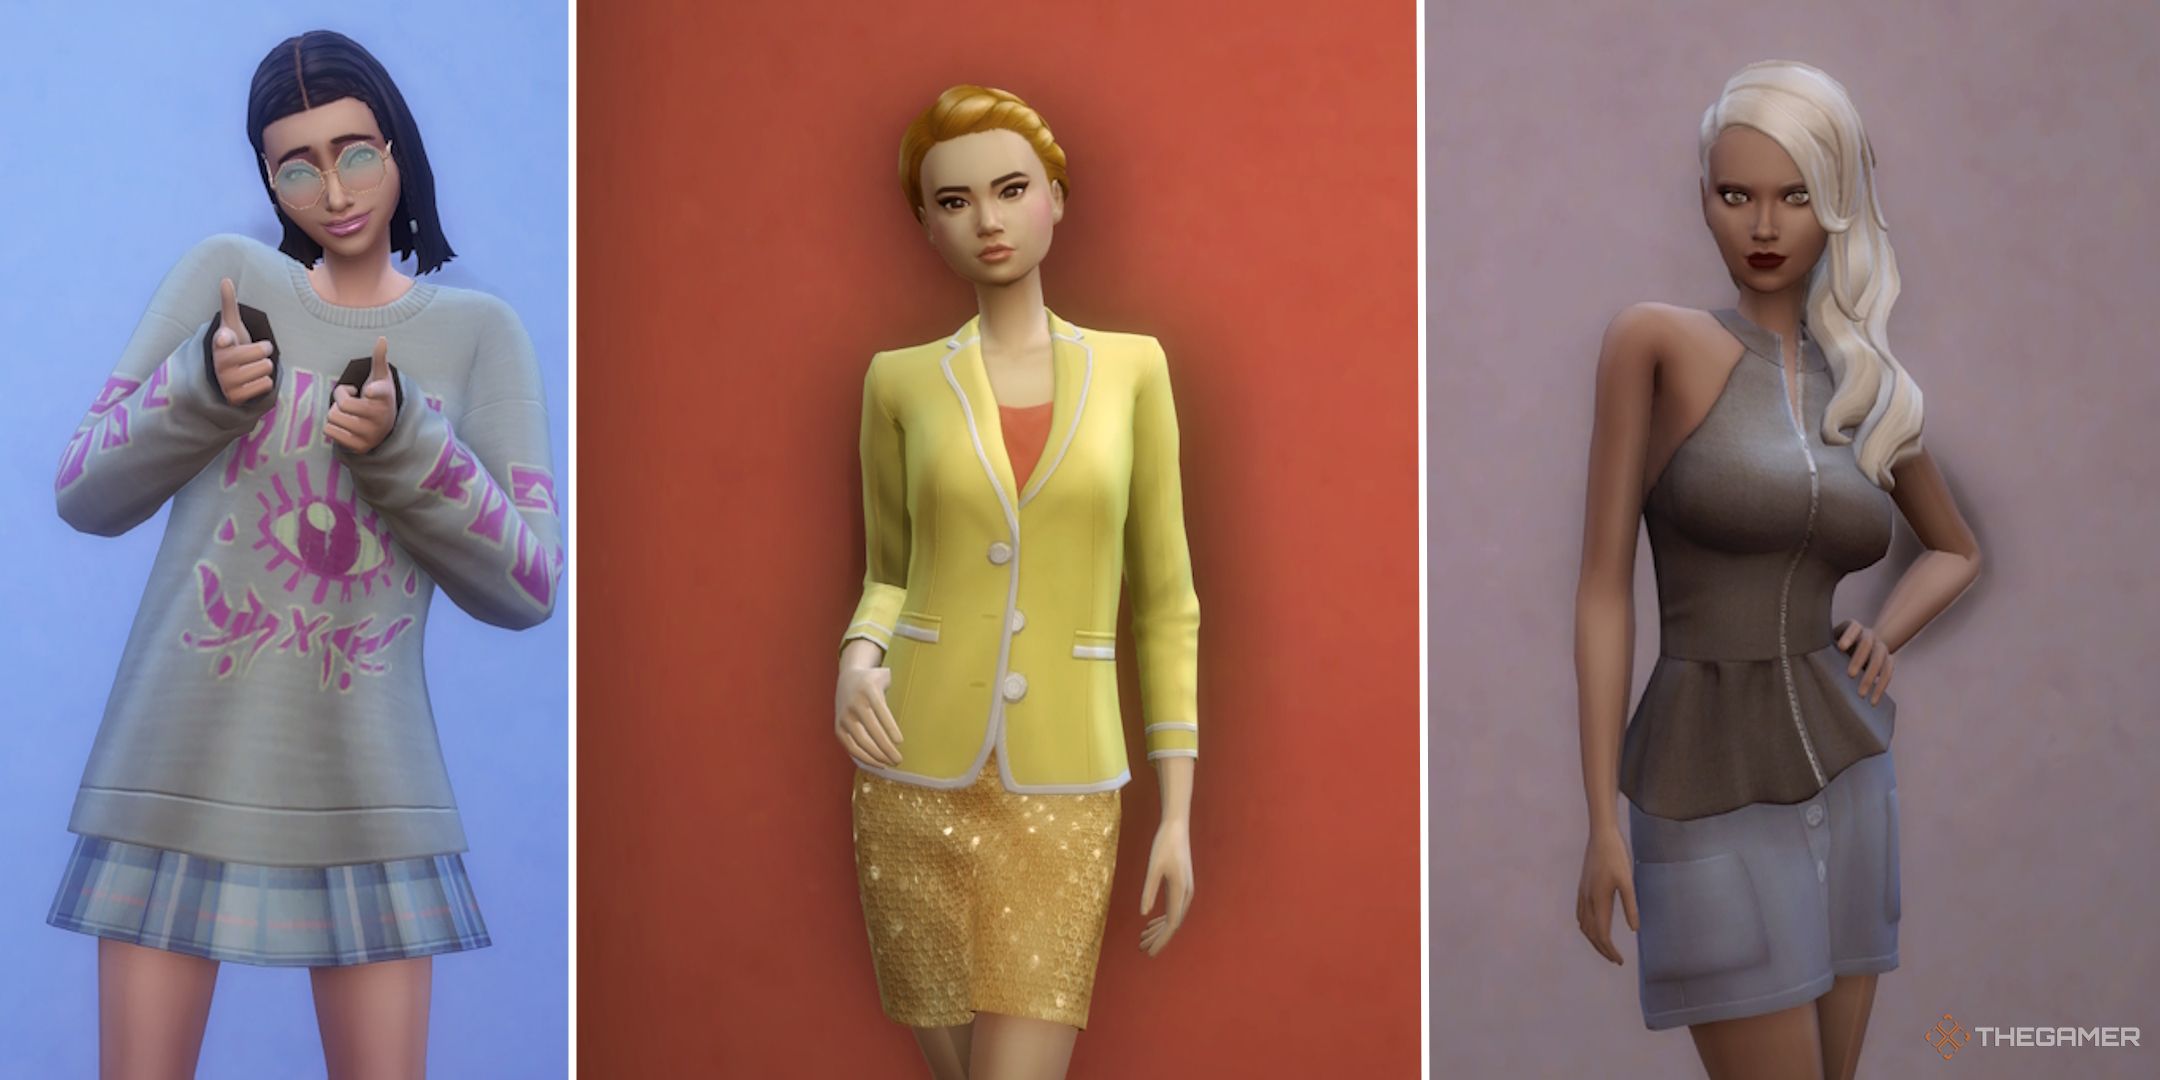 The Sun, Mercury, and Uranus Sims in the Sims 4 Astrology Challenge